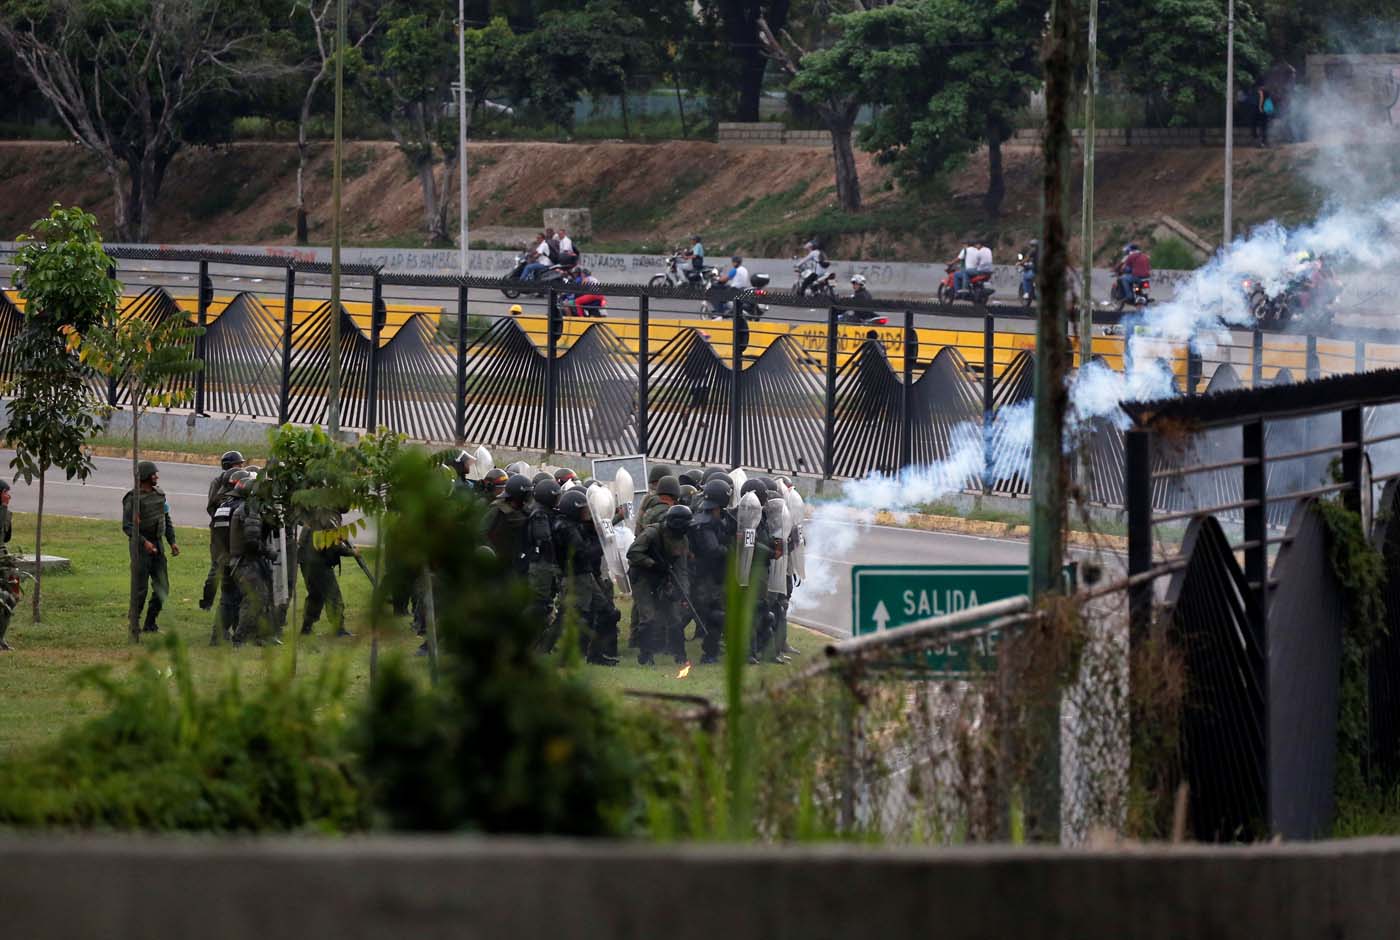 Military police take position at an air base as opposition supporters clash with them while rallying against President Nicolas Maduro in Caracas, Venezuela, May 8, 2017. REUTERS/Carlos Garcia Rawlins